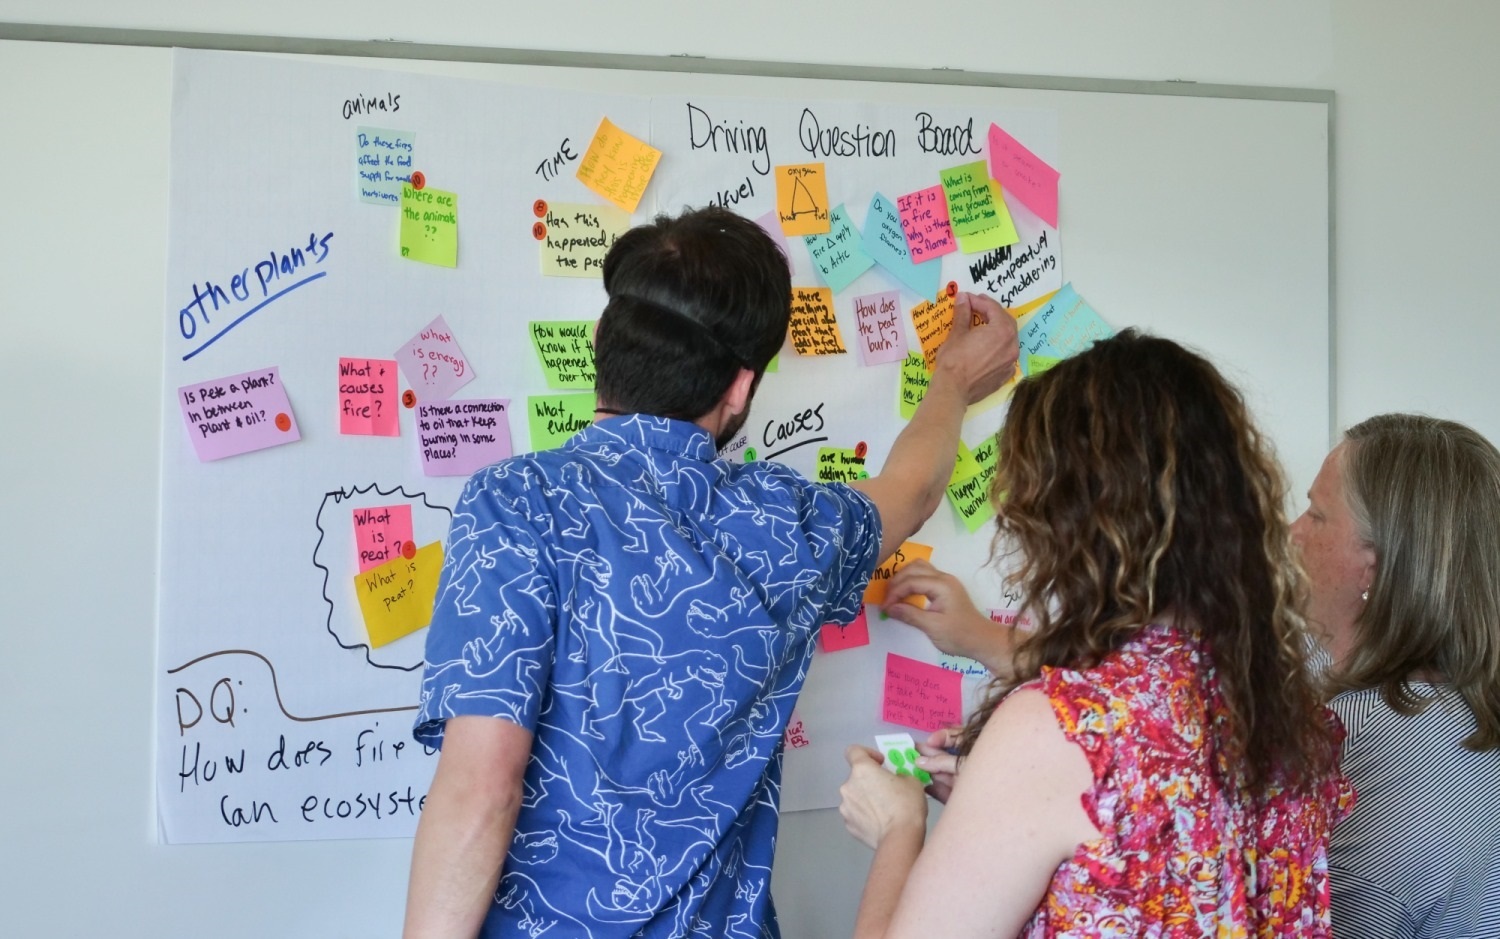 Three educators in front of a whiteboard create a "driving questions board" with sticky notes during an inquiryHub workshop.